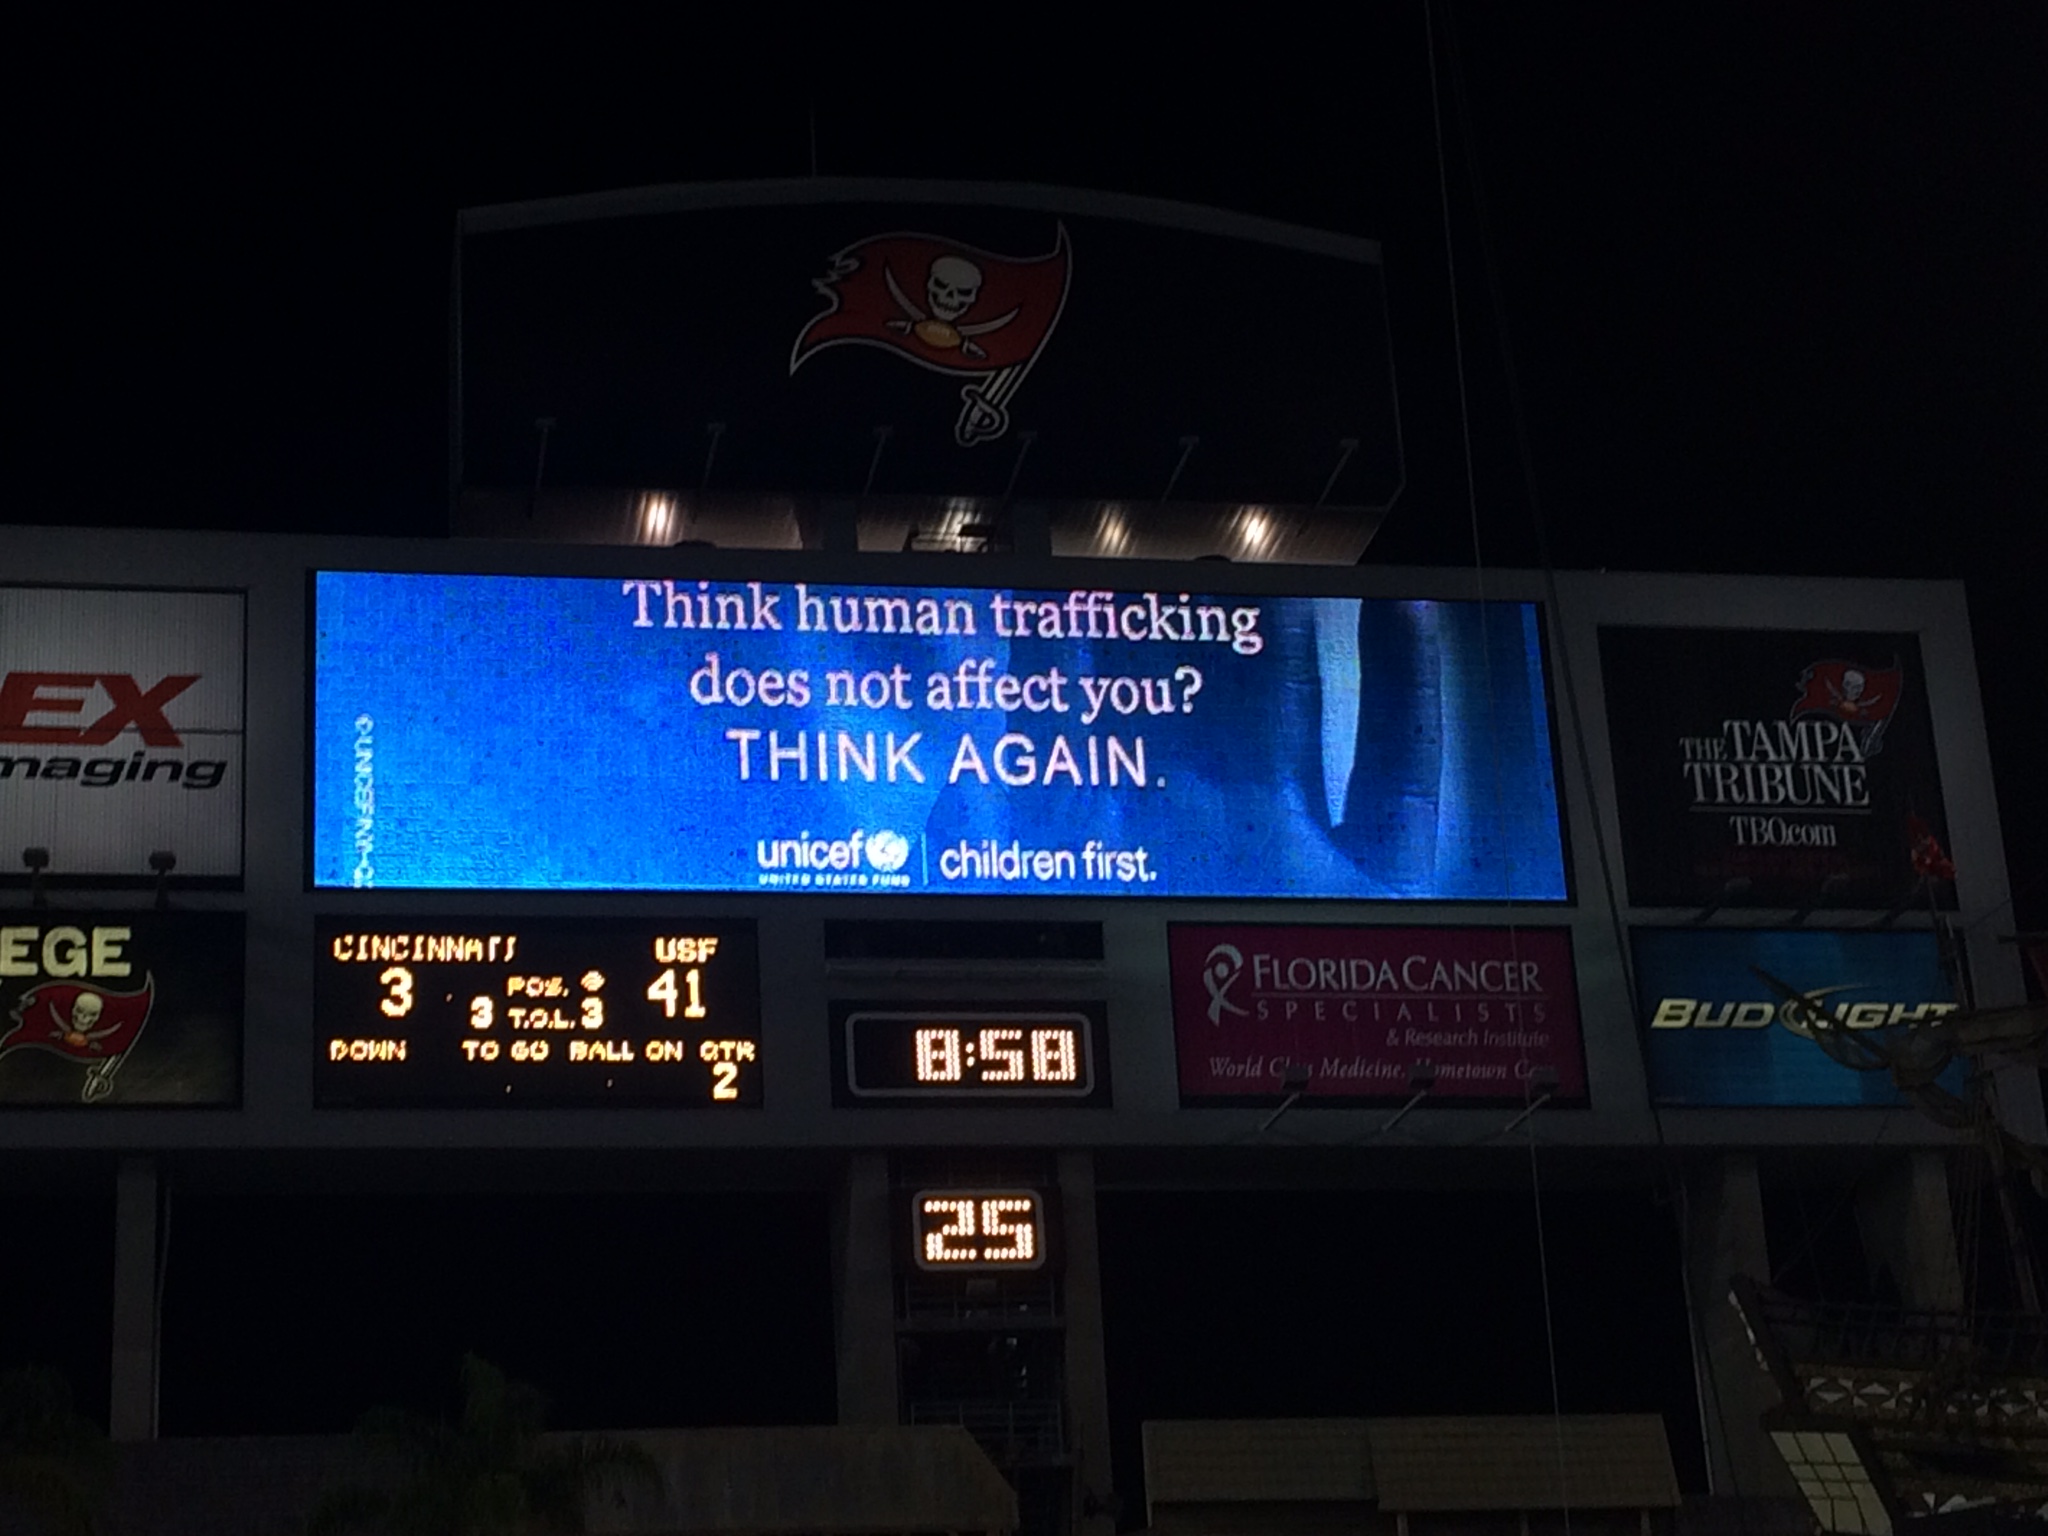 Part of the Public Service Announcement on Human Trafficking that played at USF's Football game vs. Cincinnati 